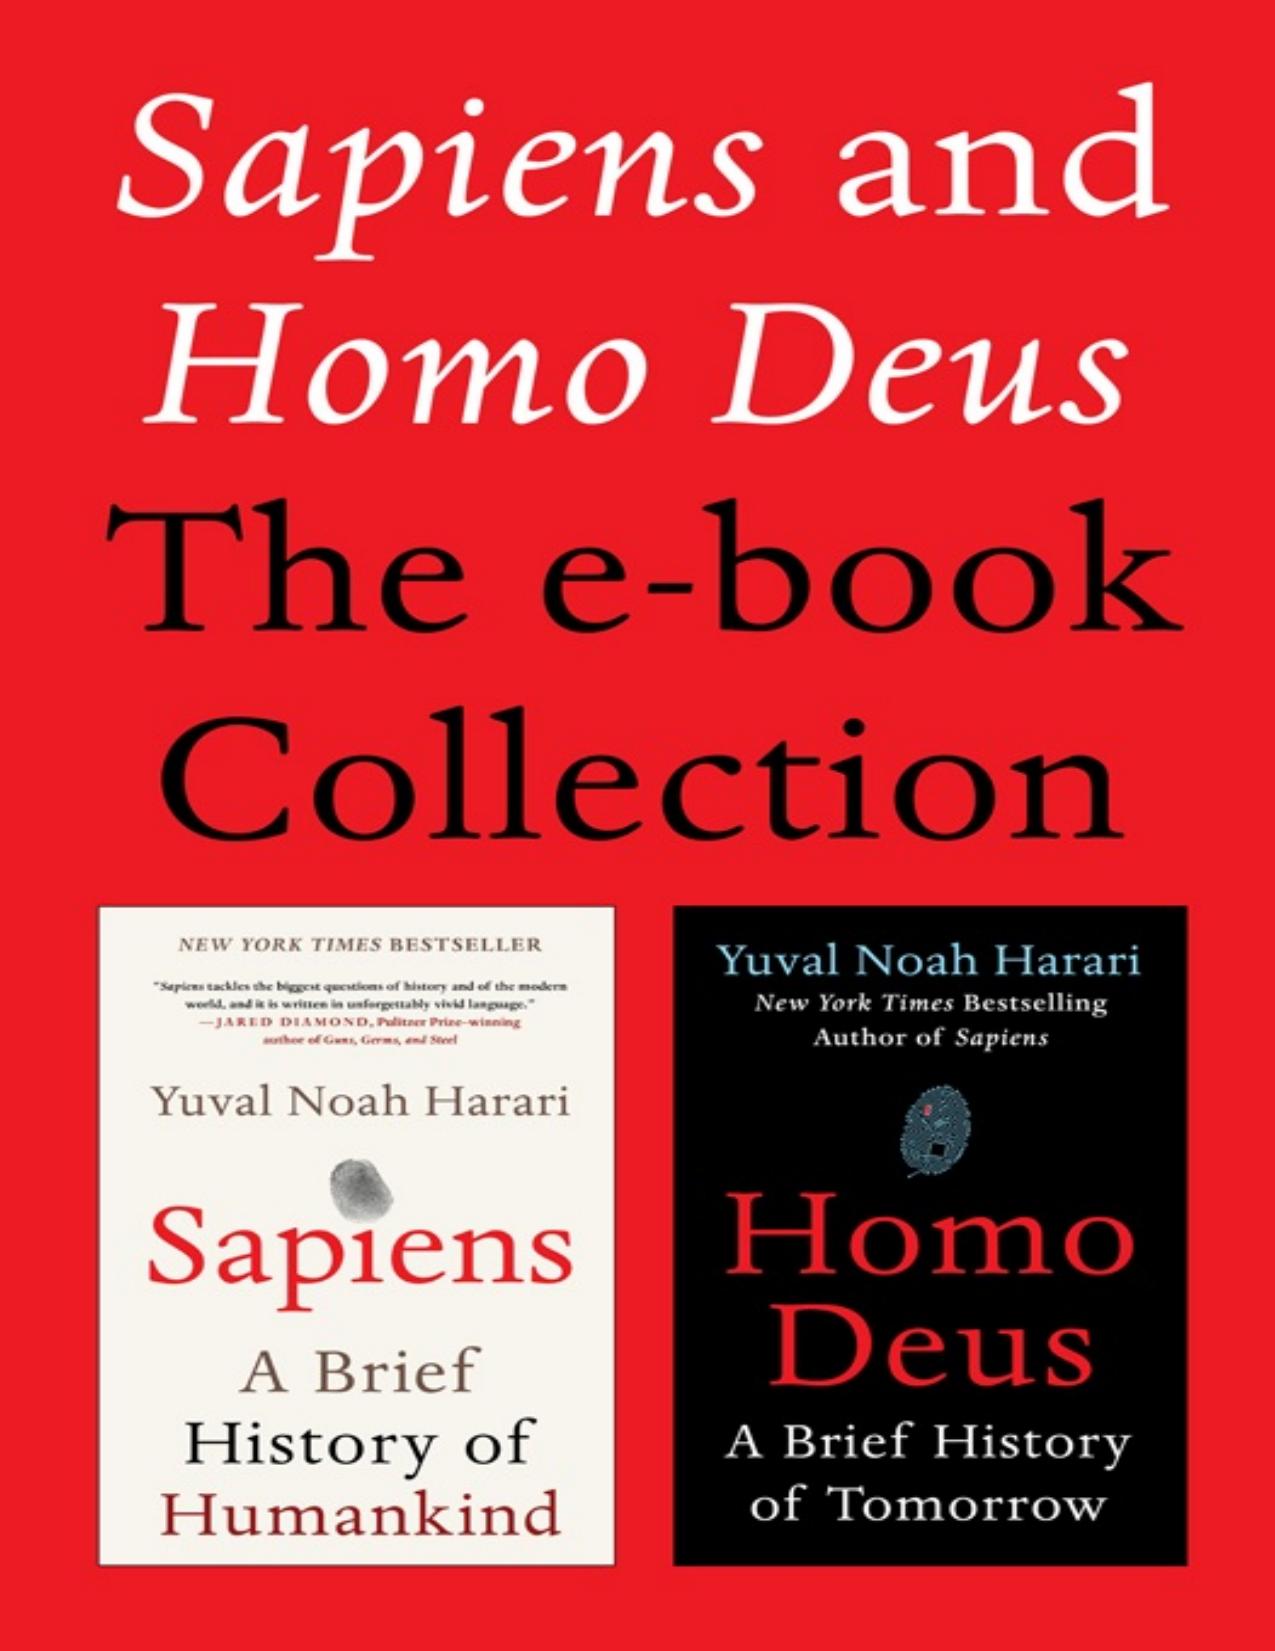 Sapiens and Homo Deus: The E-book Collection: A Brief History of Humankind and A Brief History of Tomorrow - PDFDrive.com